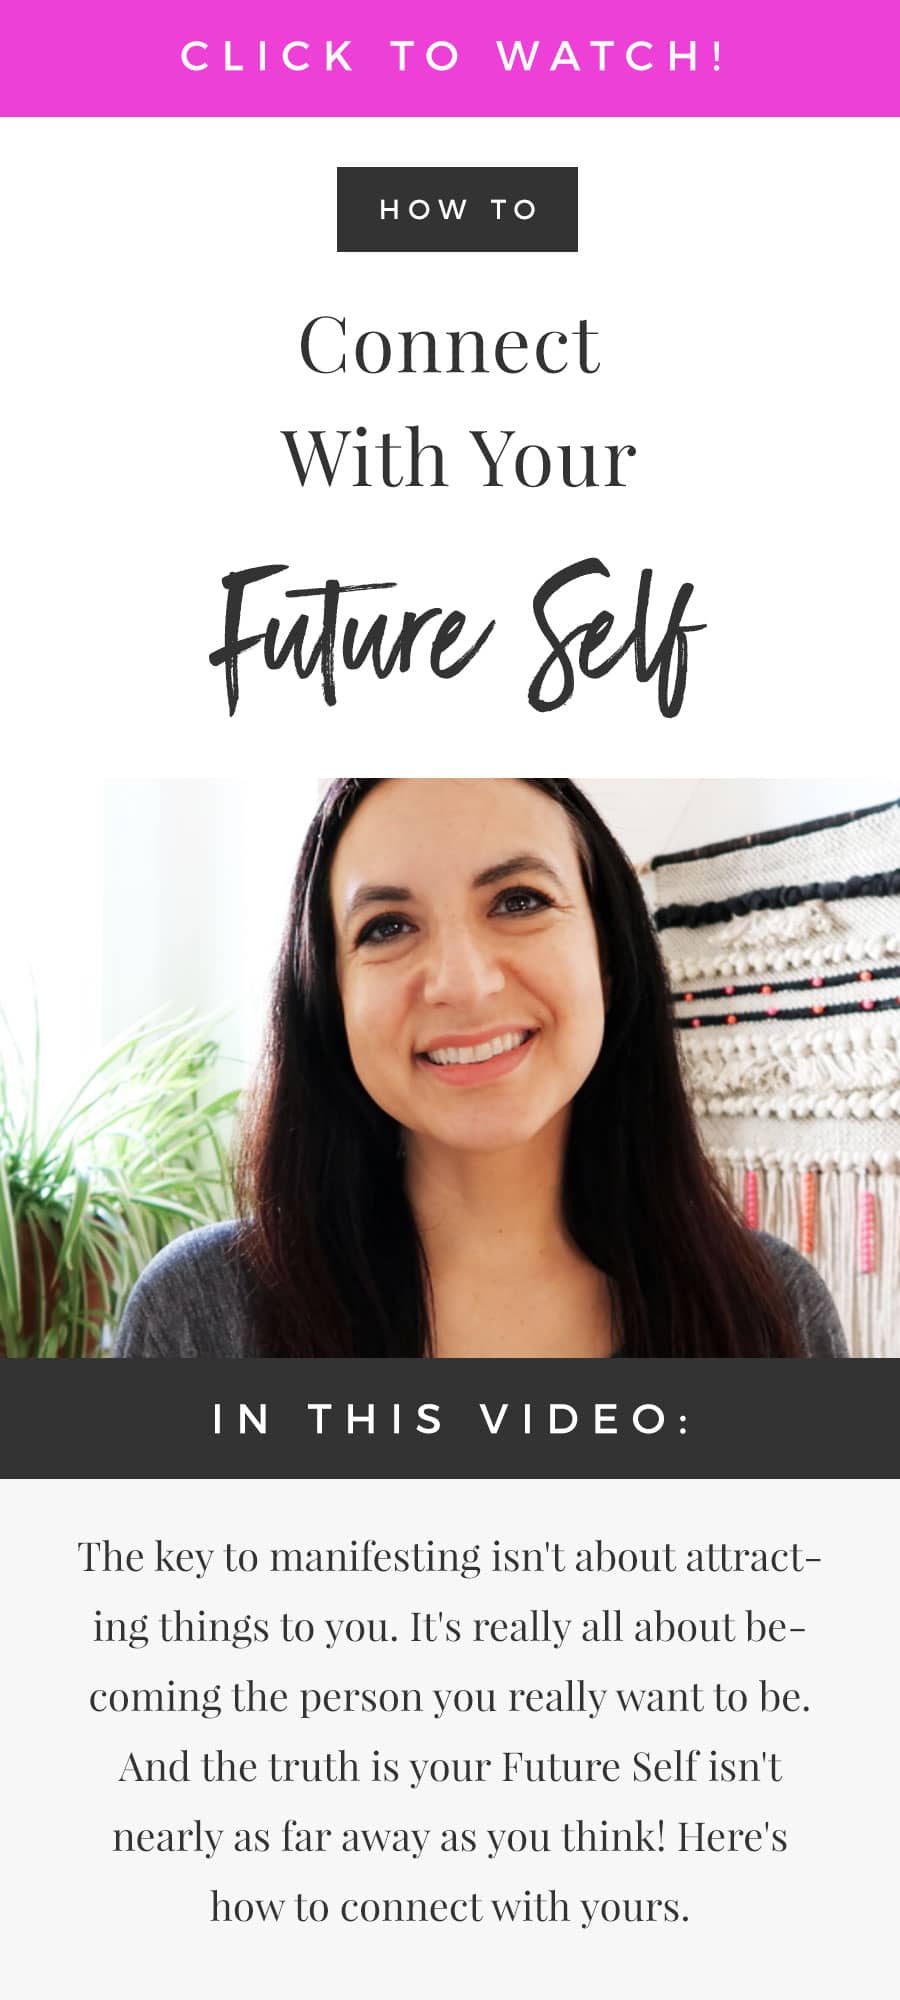 How To Connect With Your Future Self